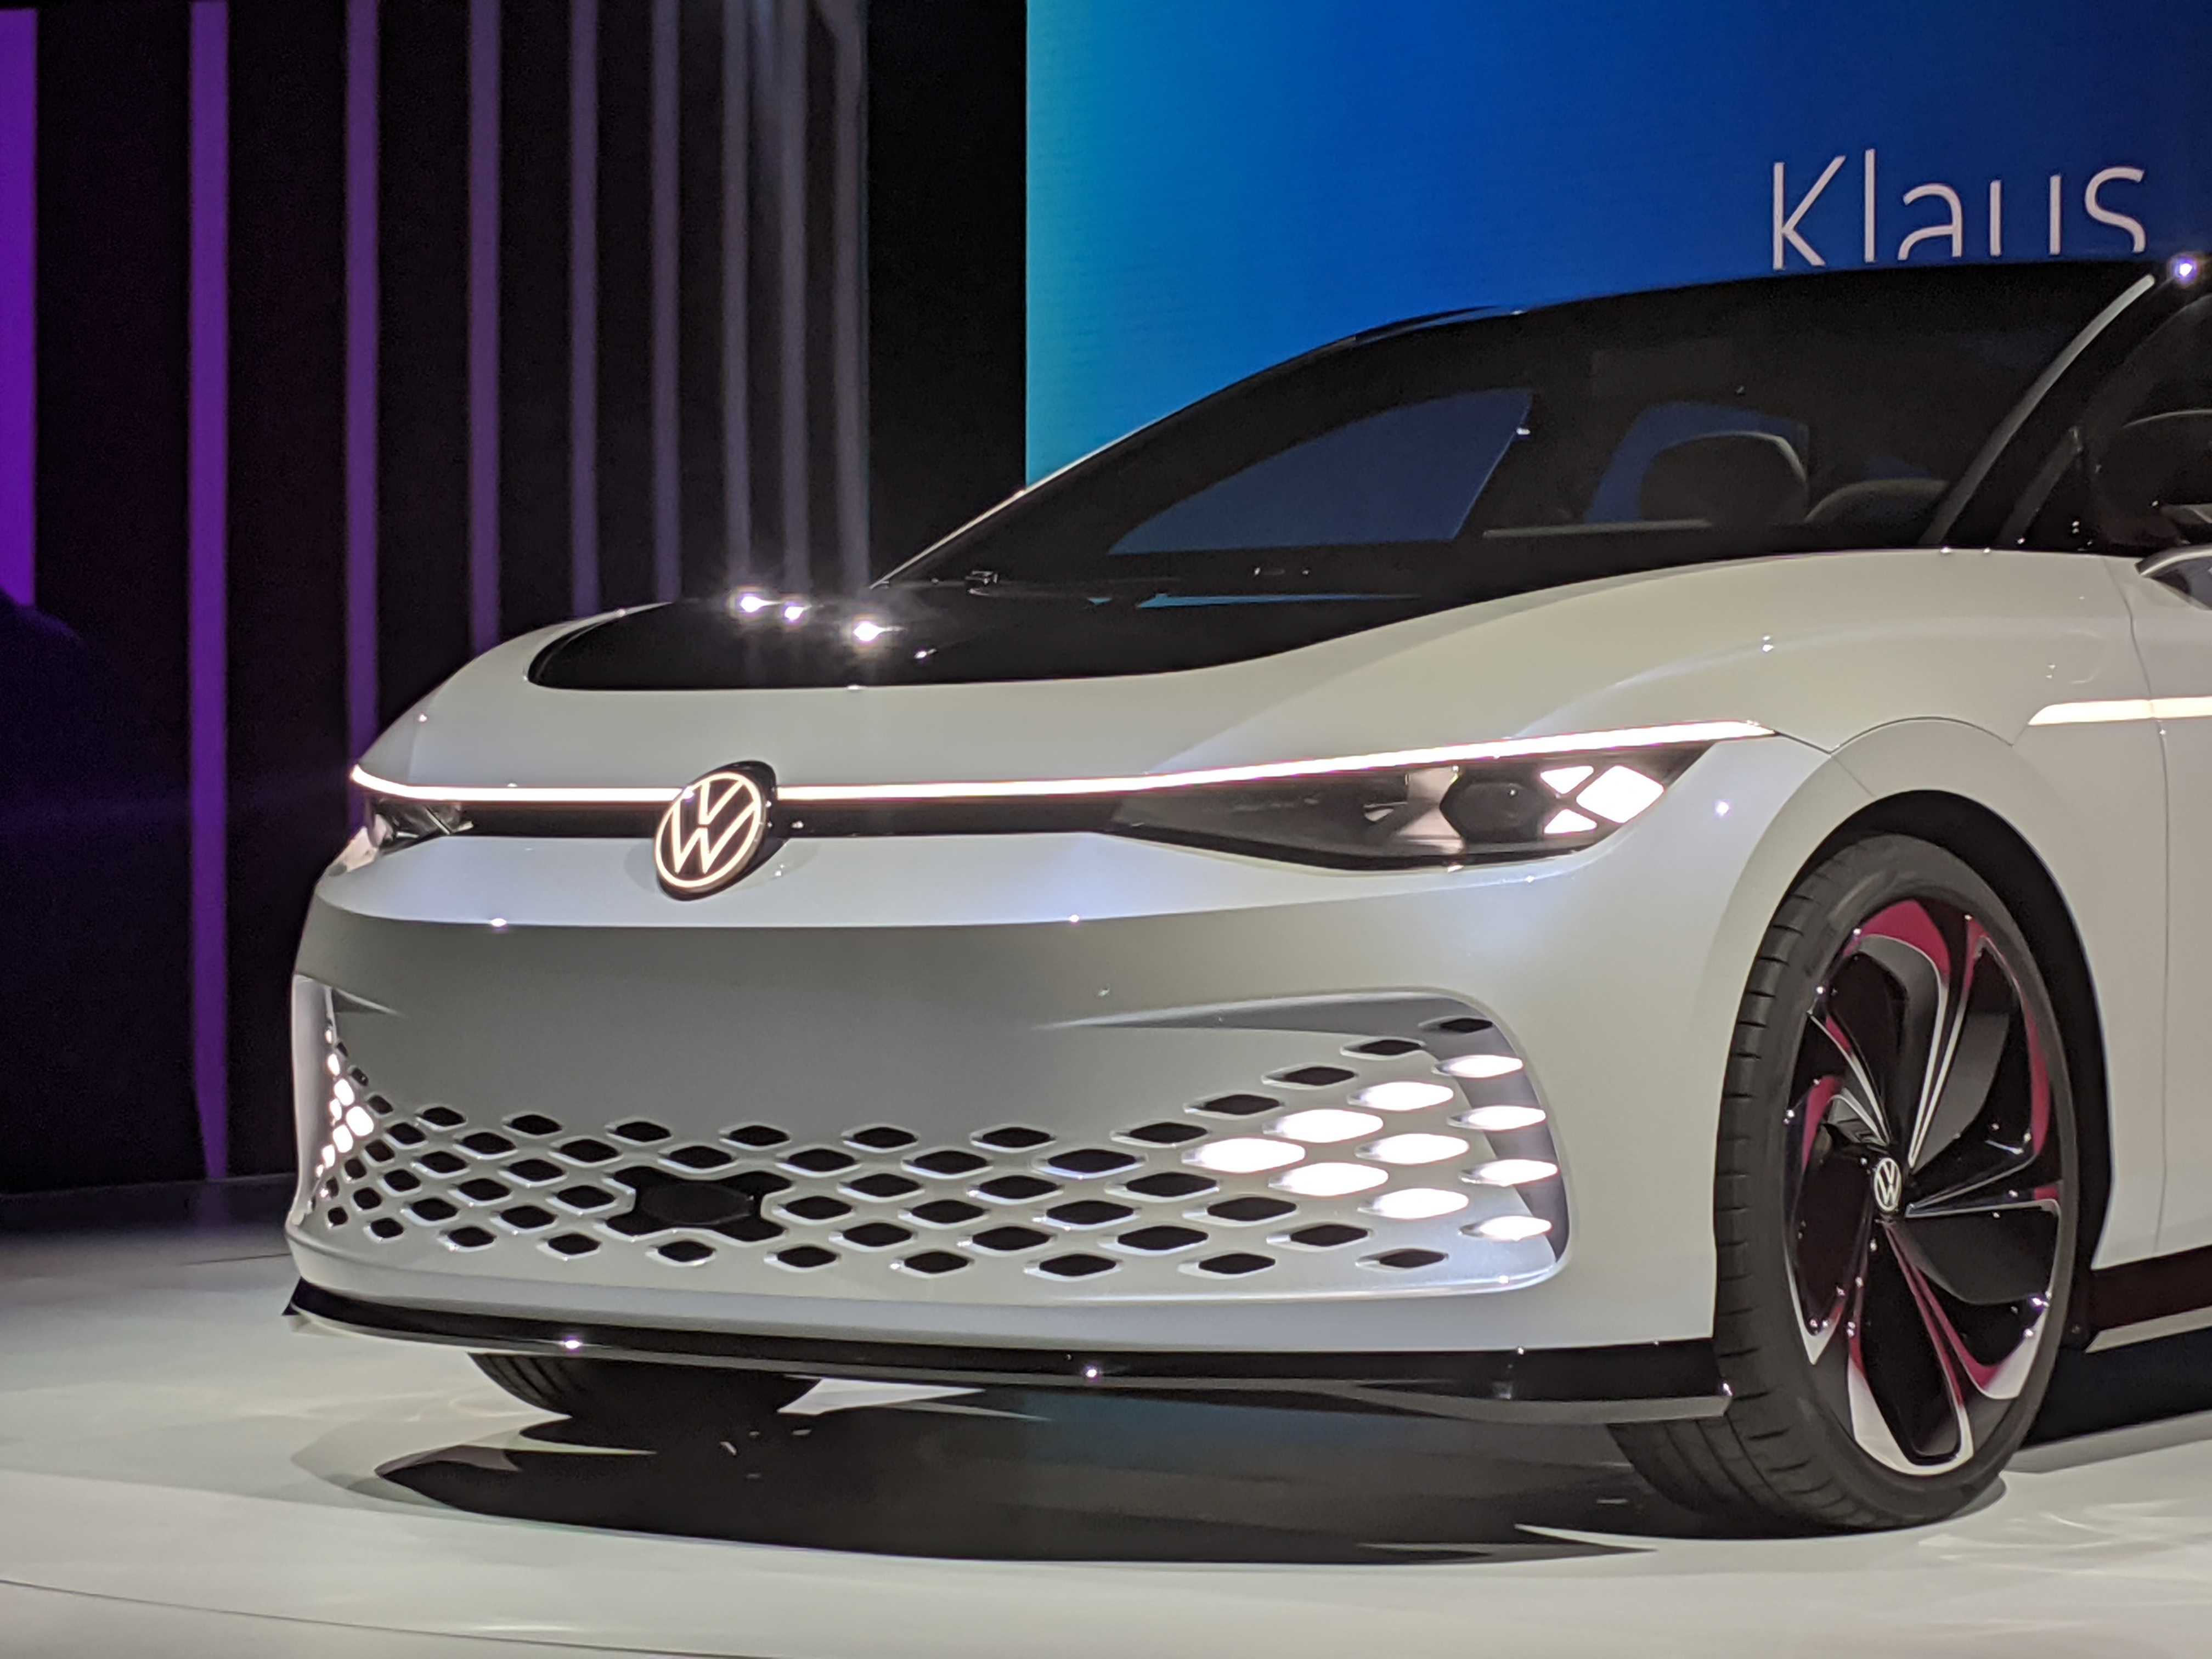 Volkswagen S New All Electric Concept Wagon Could Be Coming To The